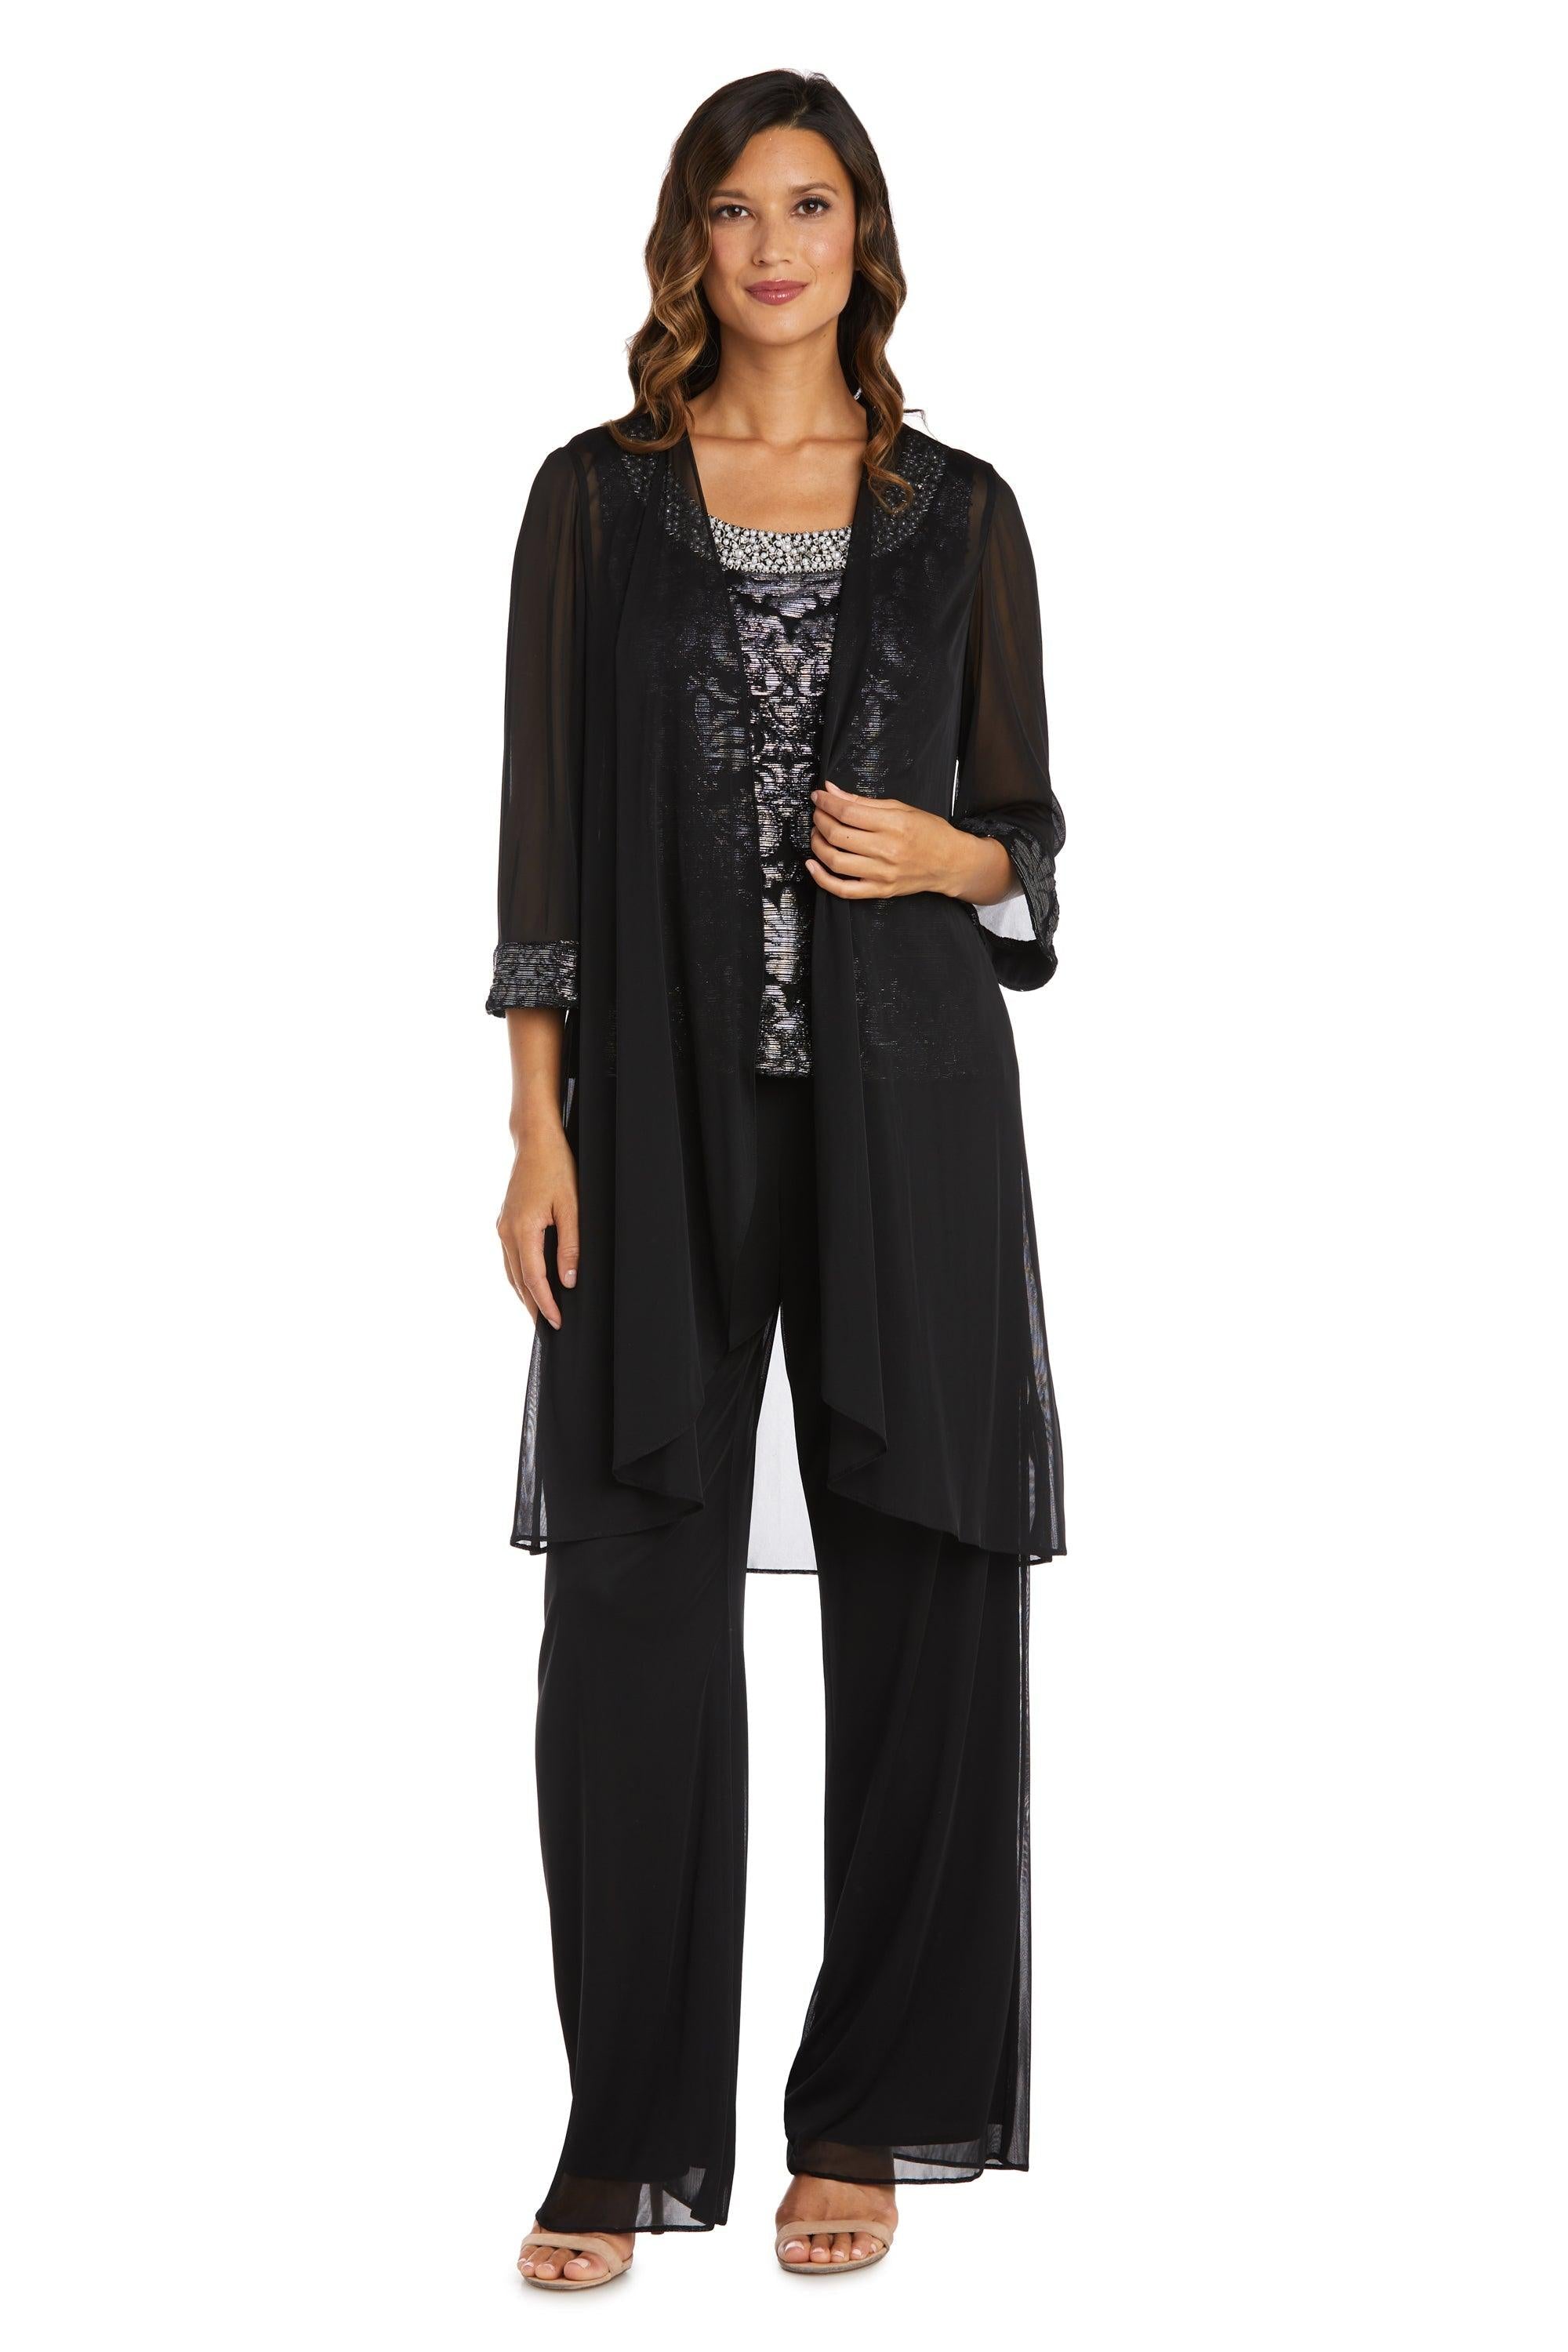 R&M Richards 7676 Formal Beaded Duster Pant Suit | The Dress Outlet